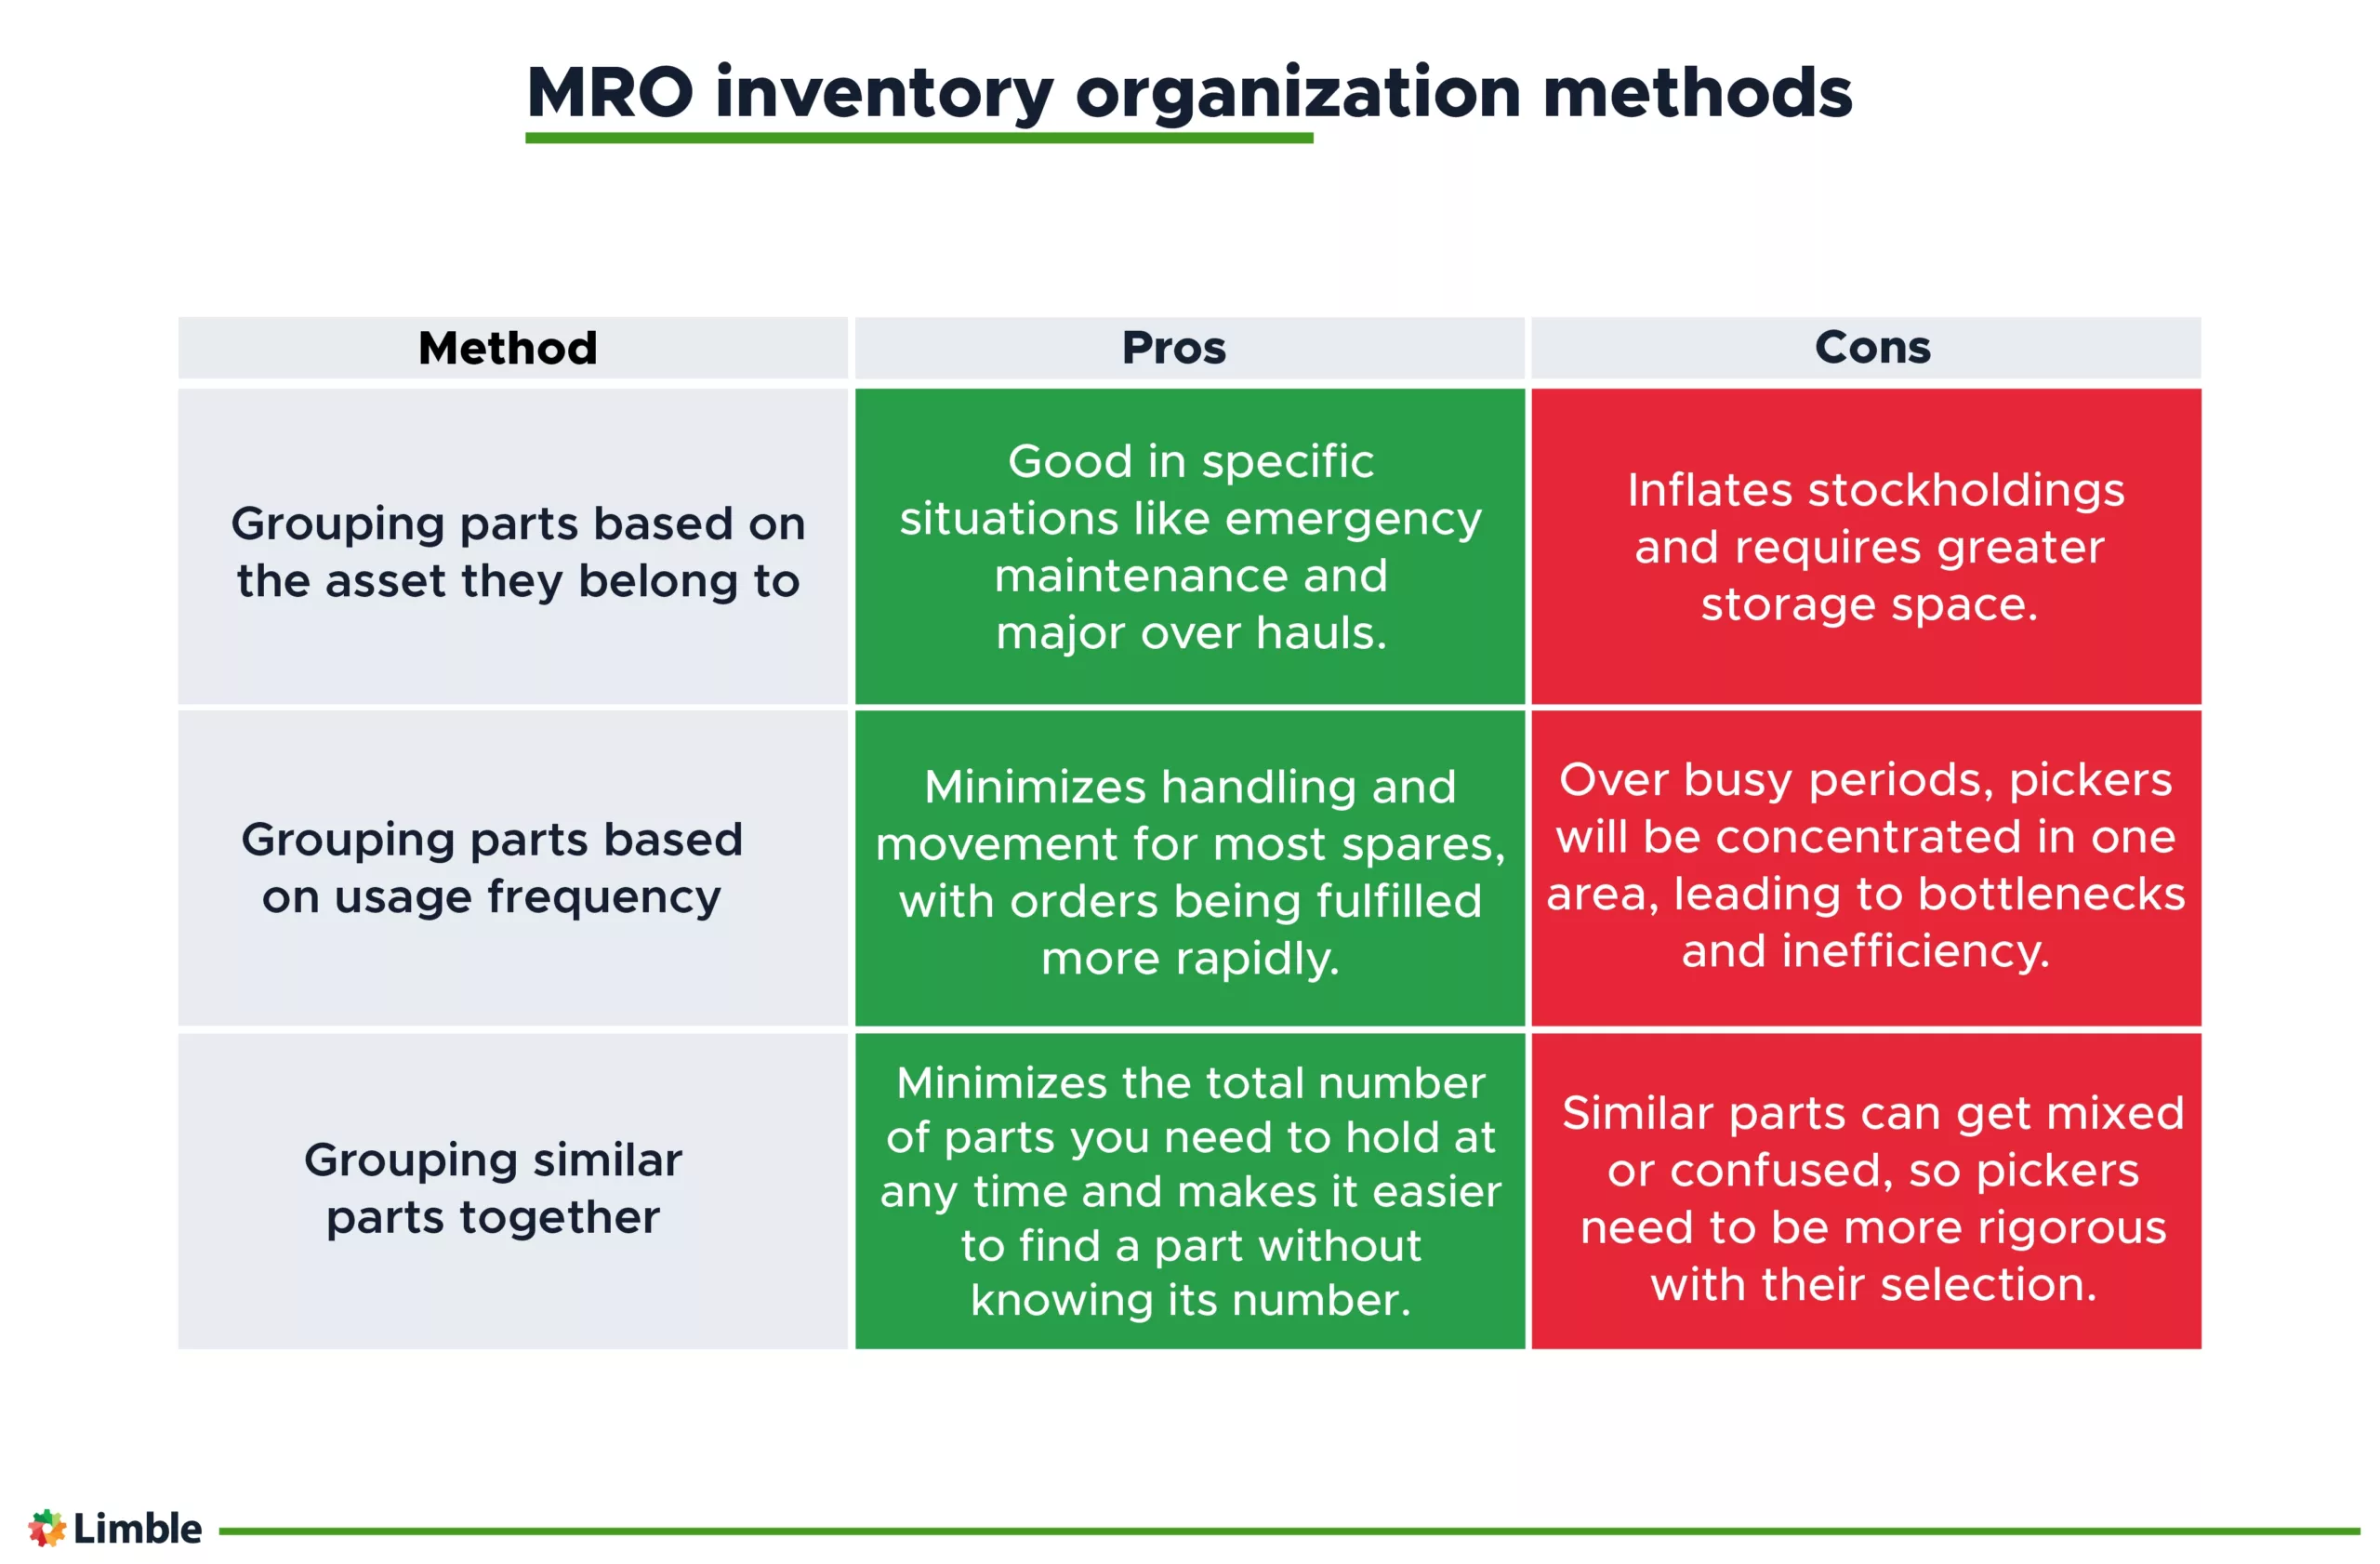 Pros and cons of the 3 most common MRO inventory organization methods.